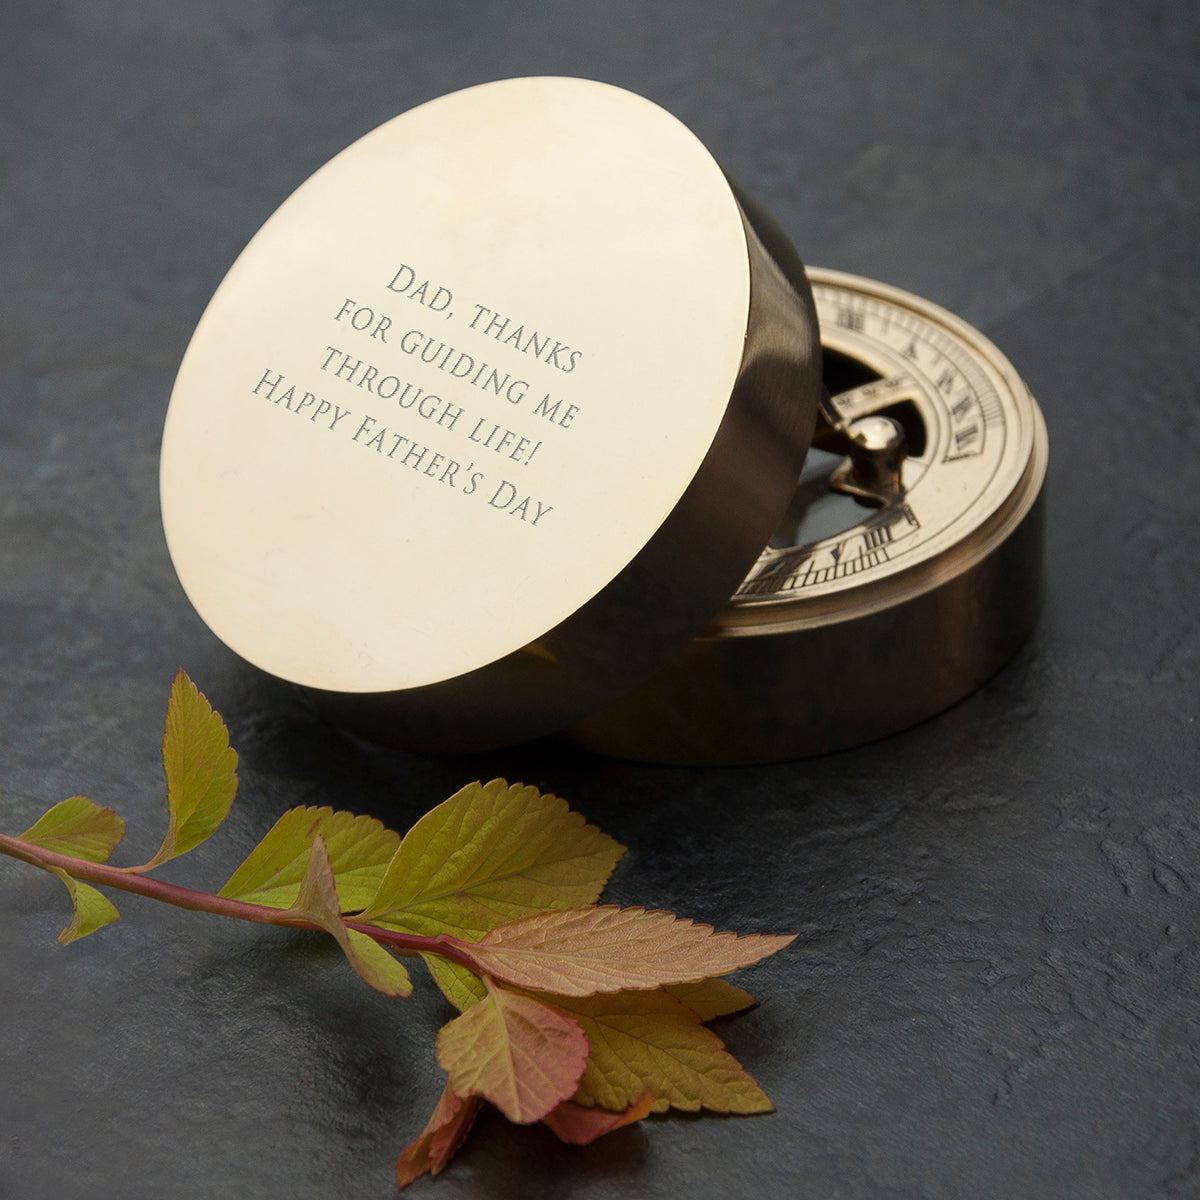 Personalized Keepsakes - Personalized Adventurer's Brass Sundial and Compass 